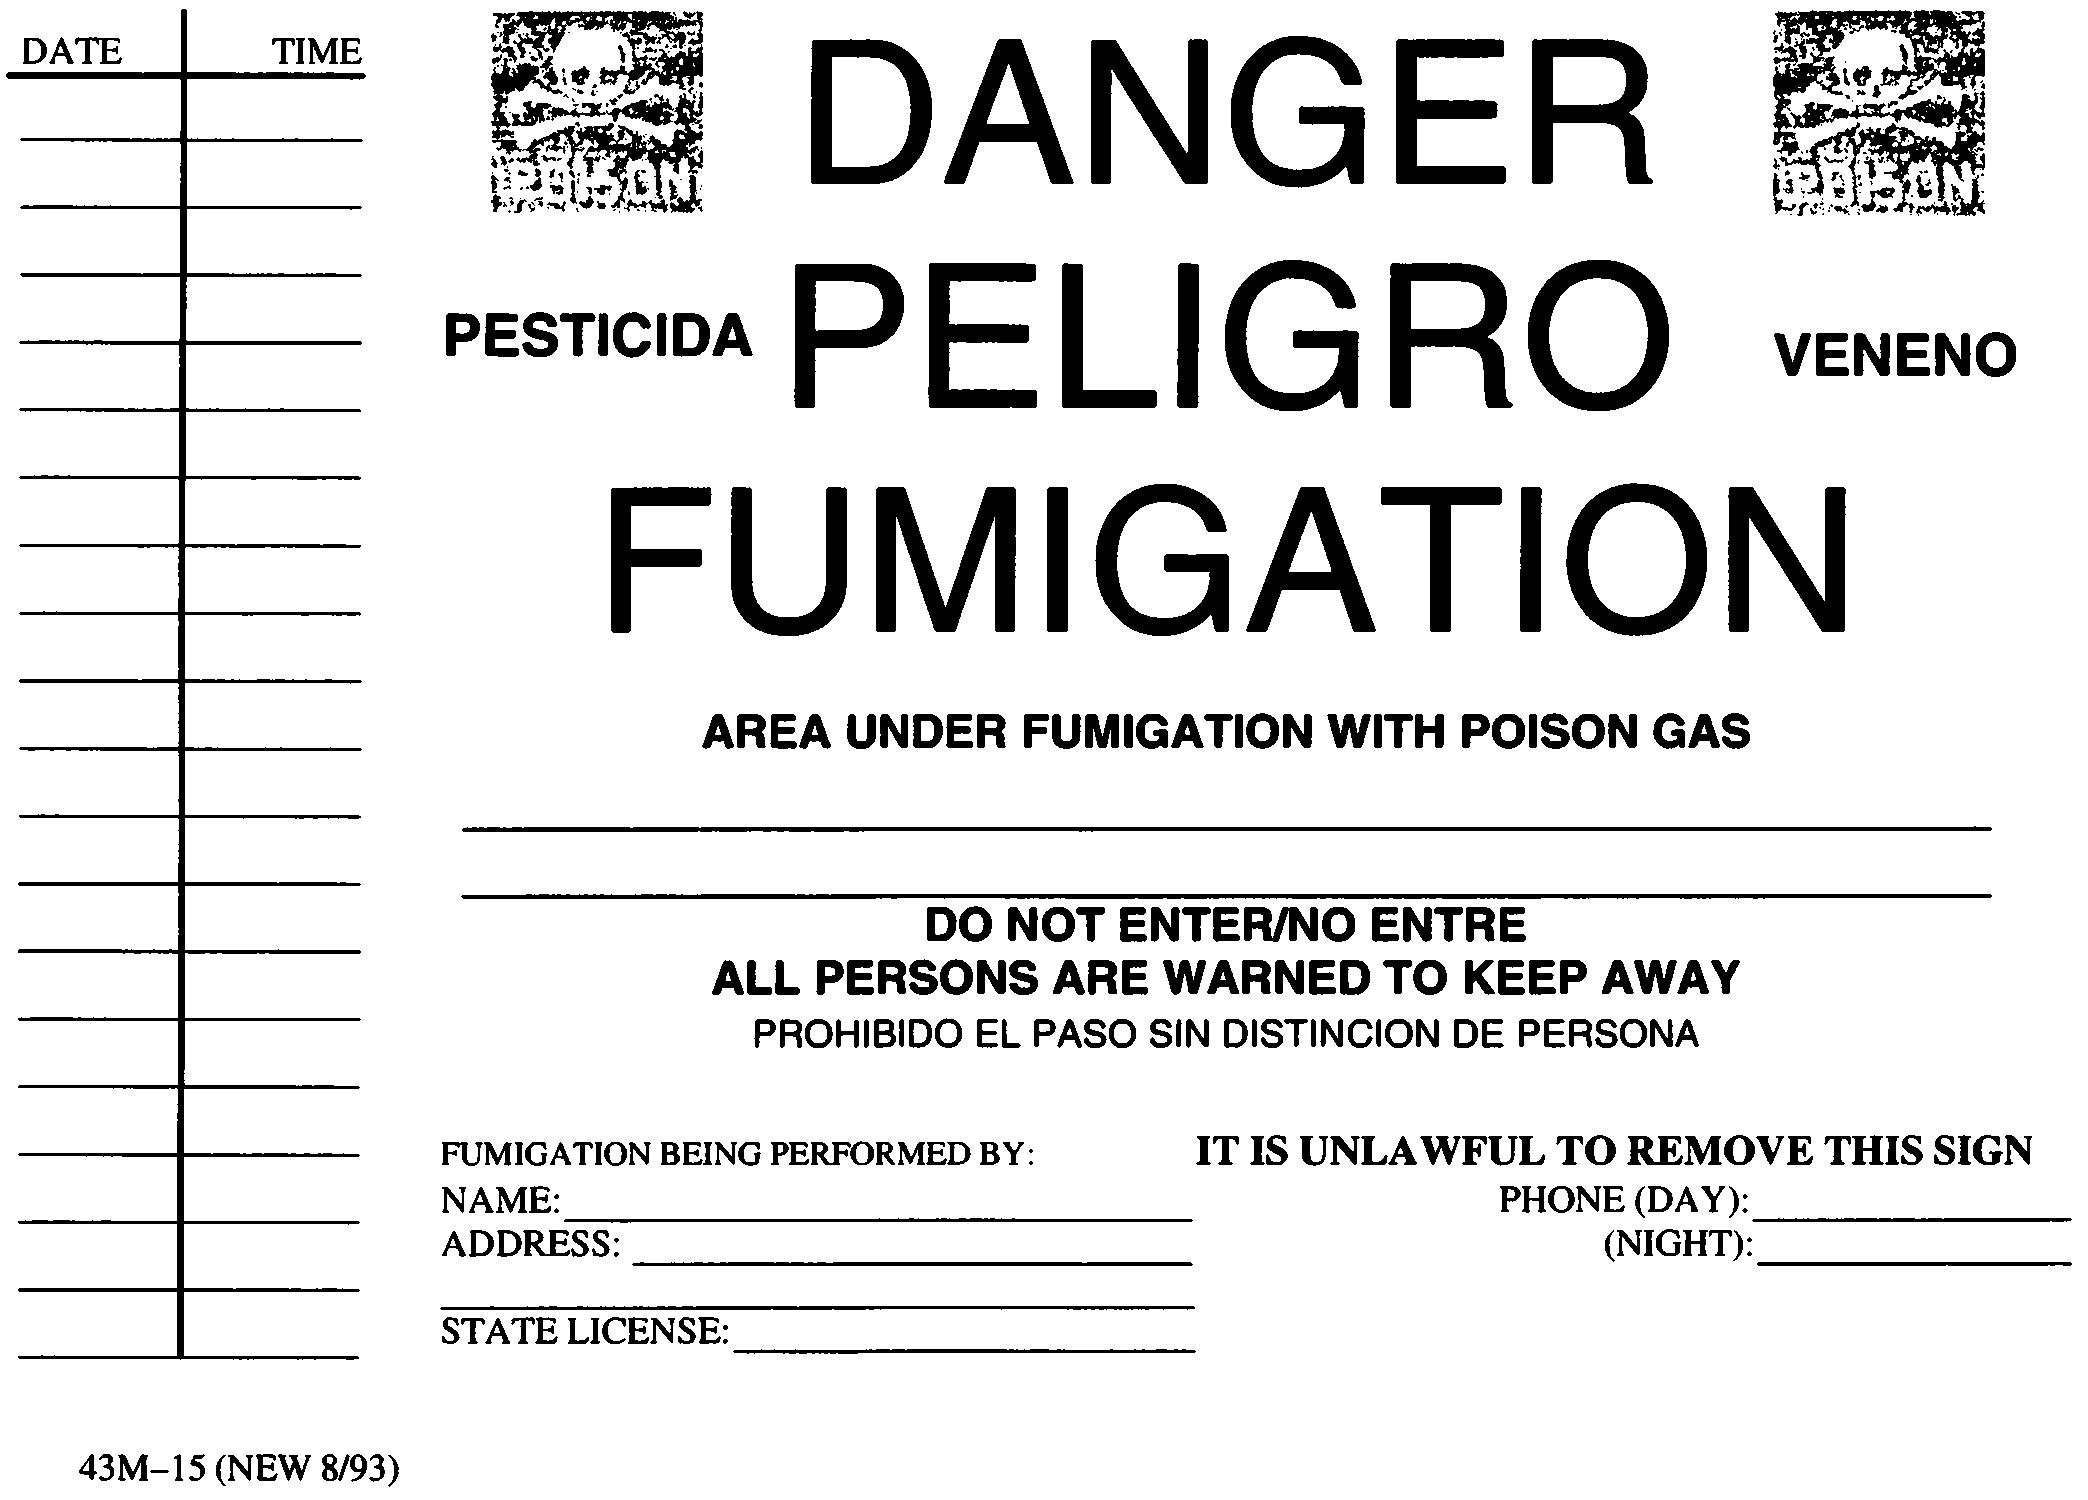 Image 1 within § 1974. Fumigation Warning Signs.